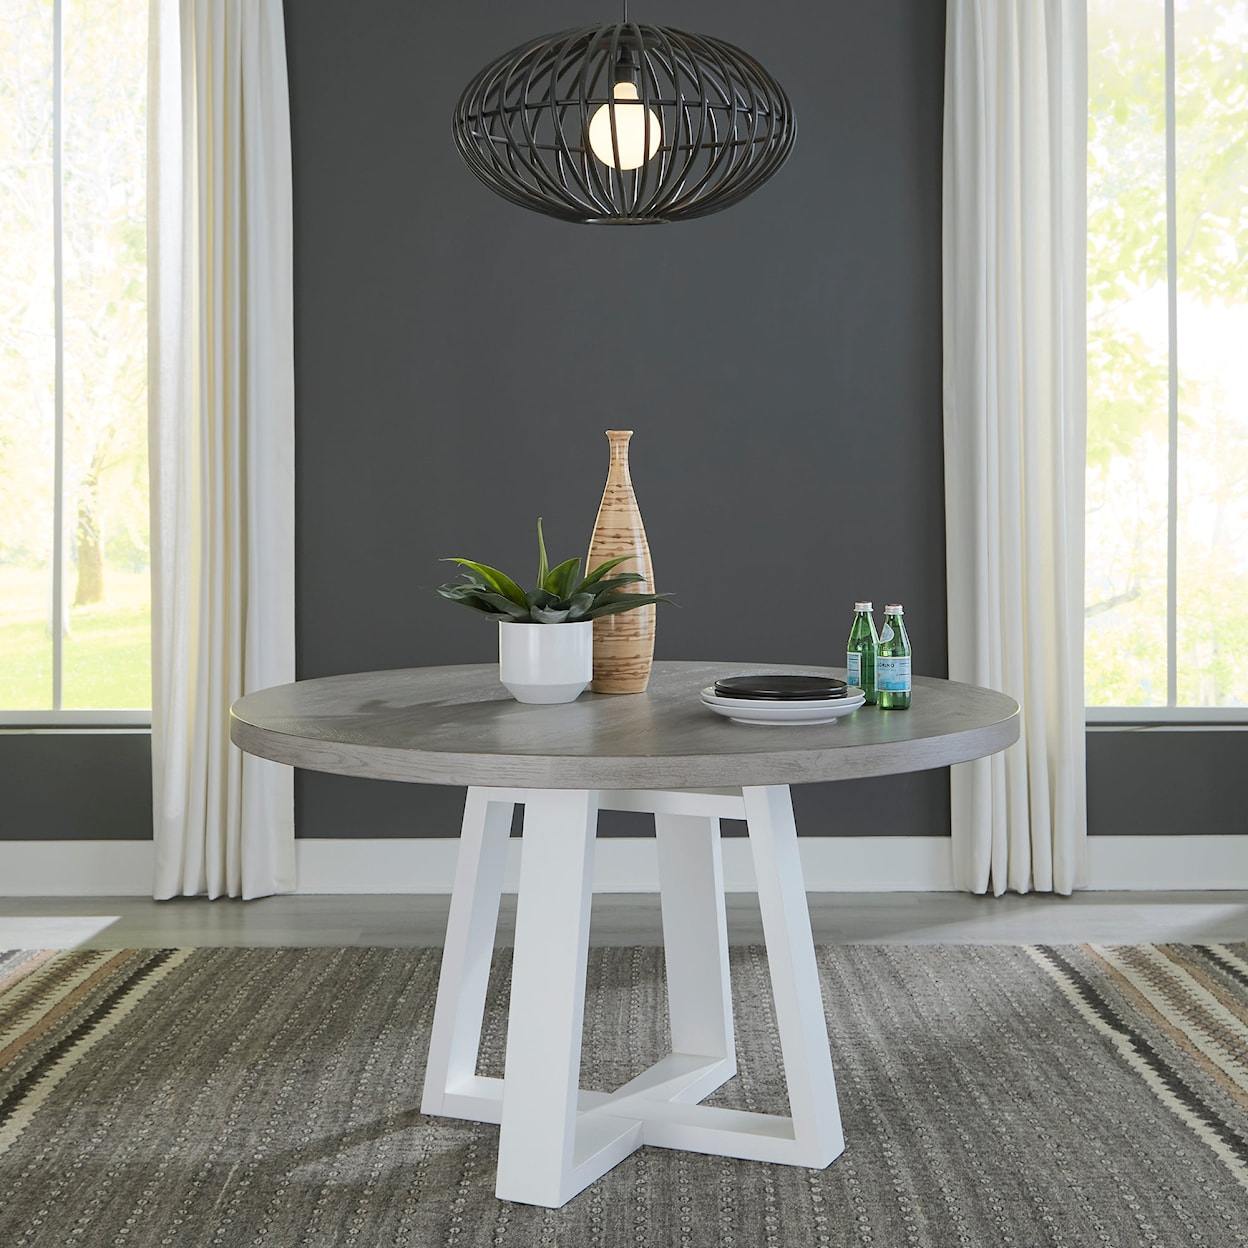 Libby Palmetto Heights Round Pedestal Dining Table